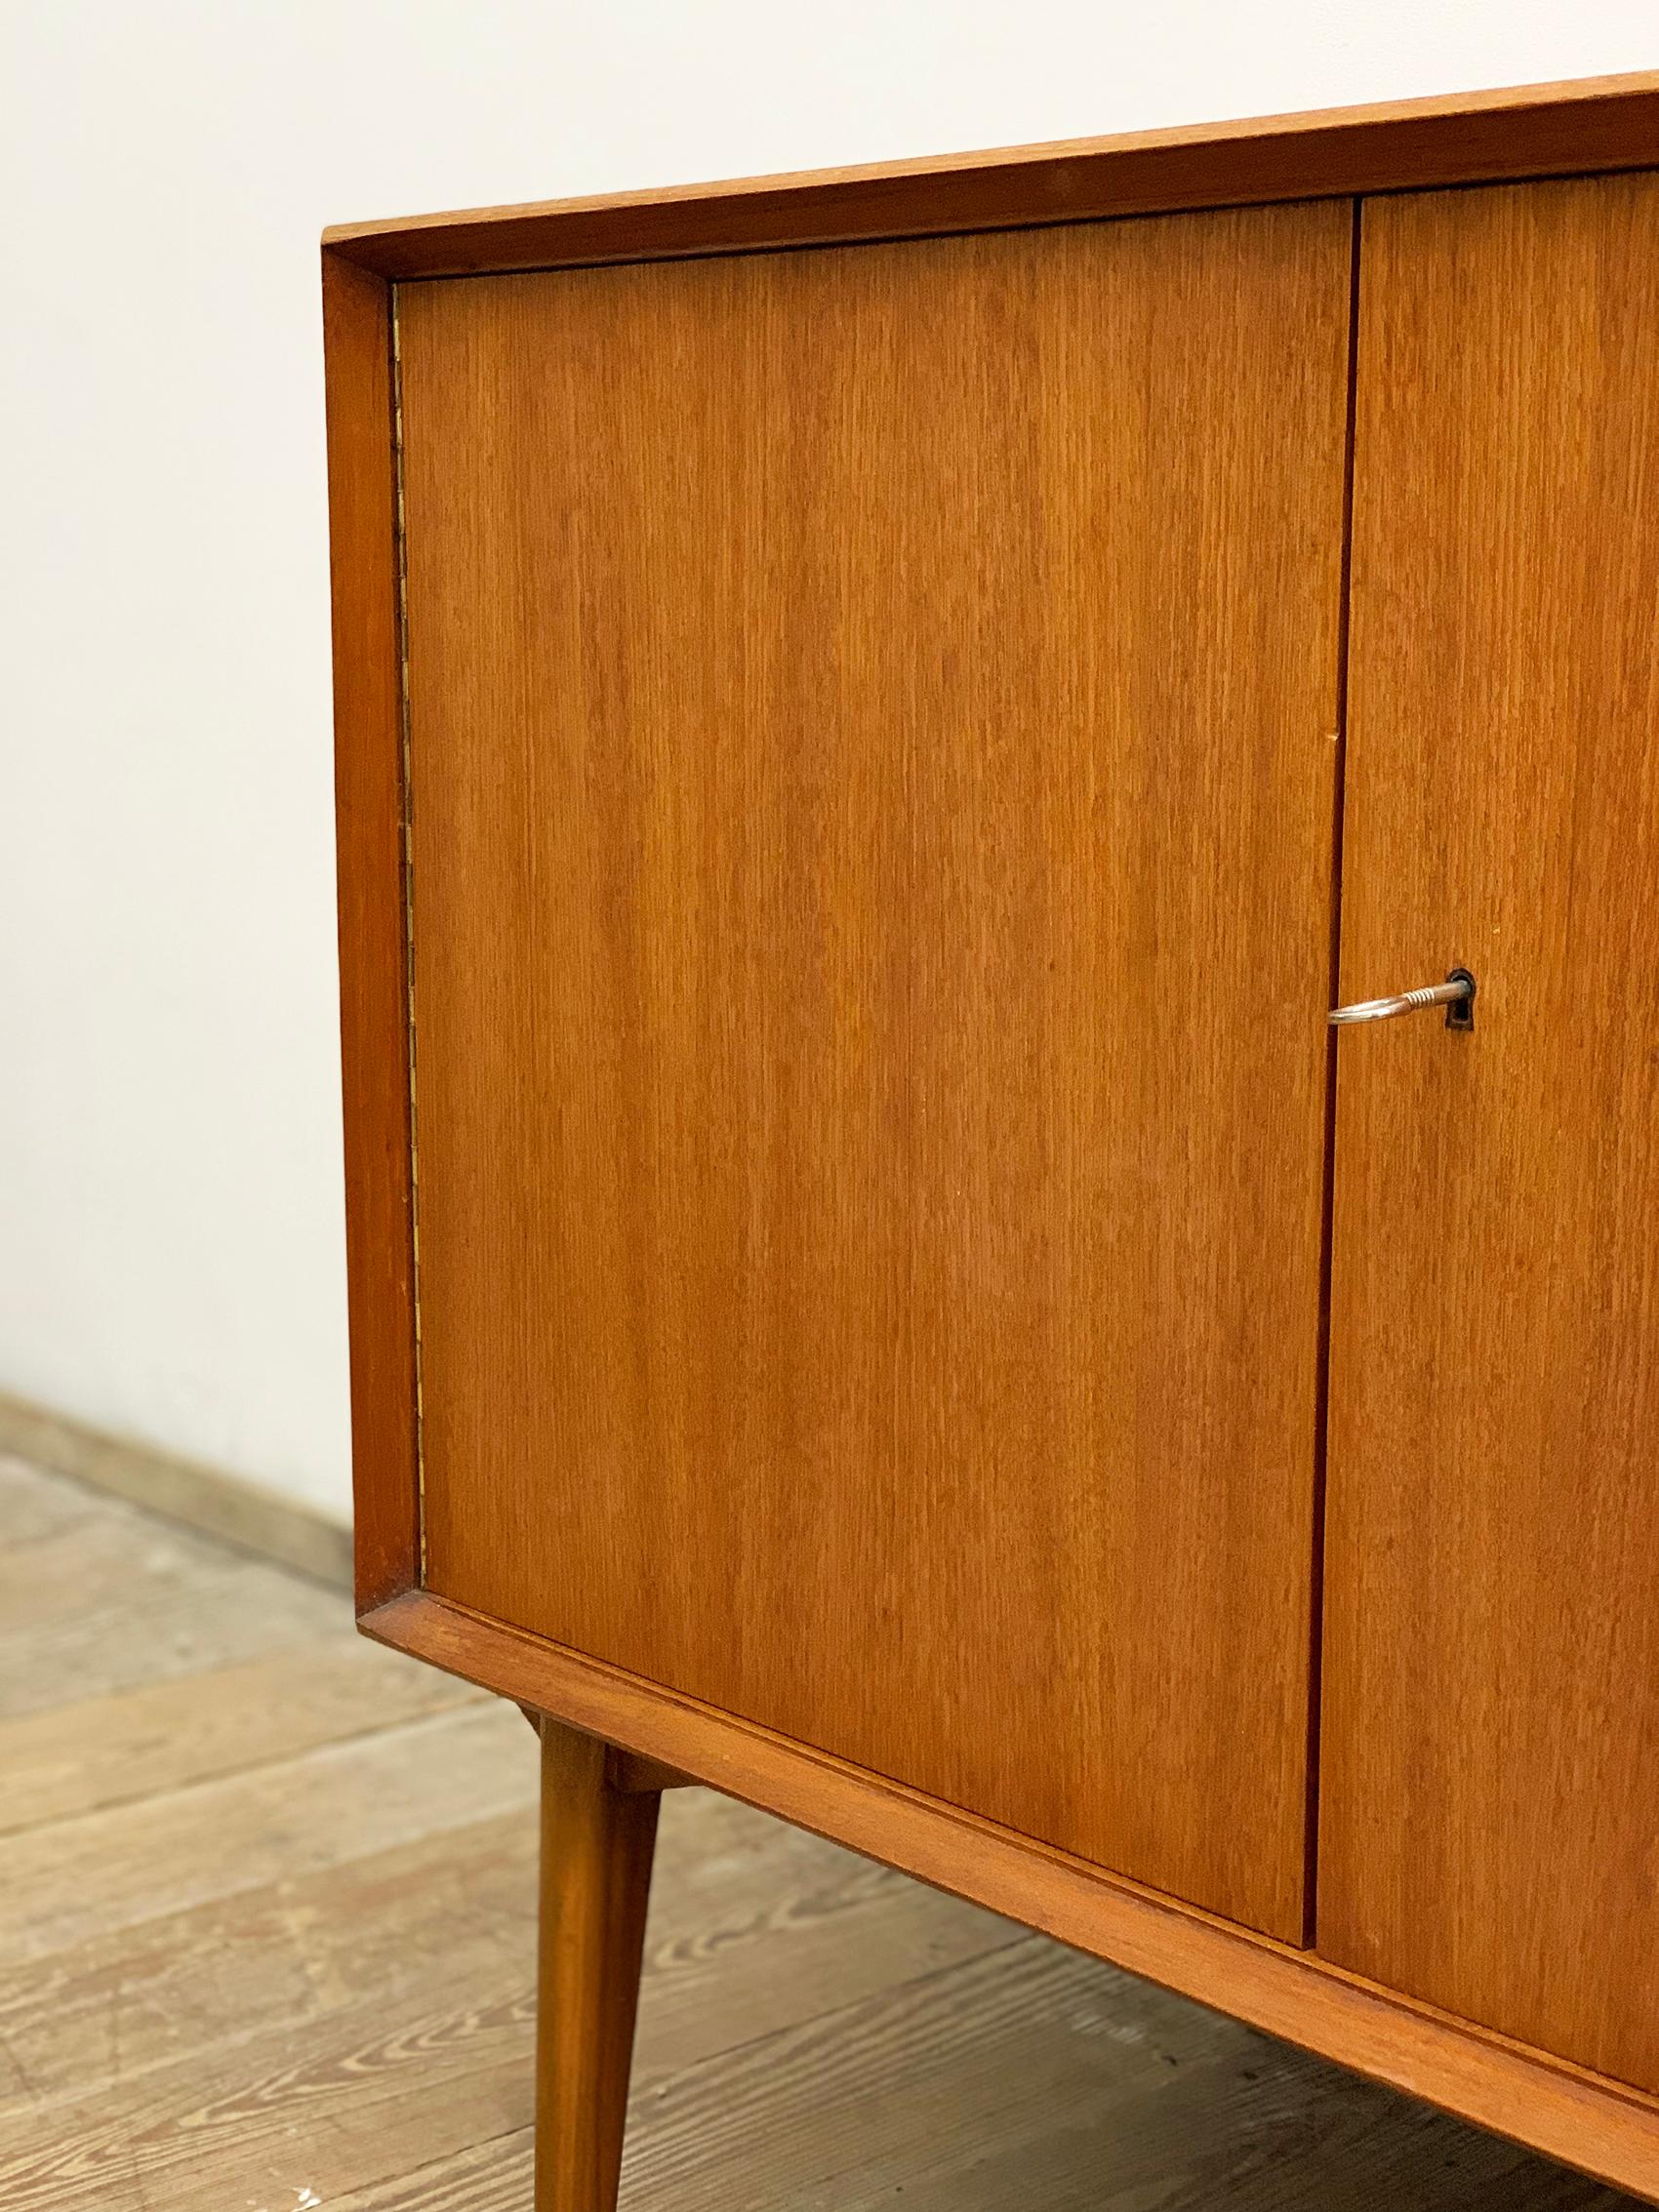 Small Mid-Century Sideboard in Teak by Rex Raab for Wilhelm Renz, Germany, 1960s For Sale 5